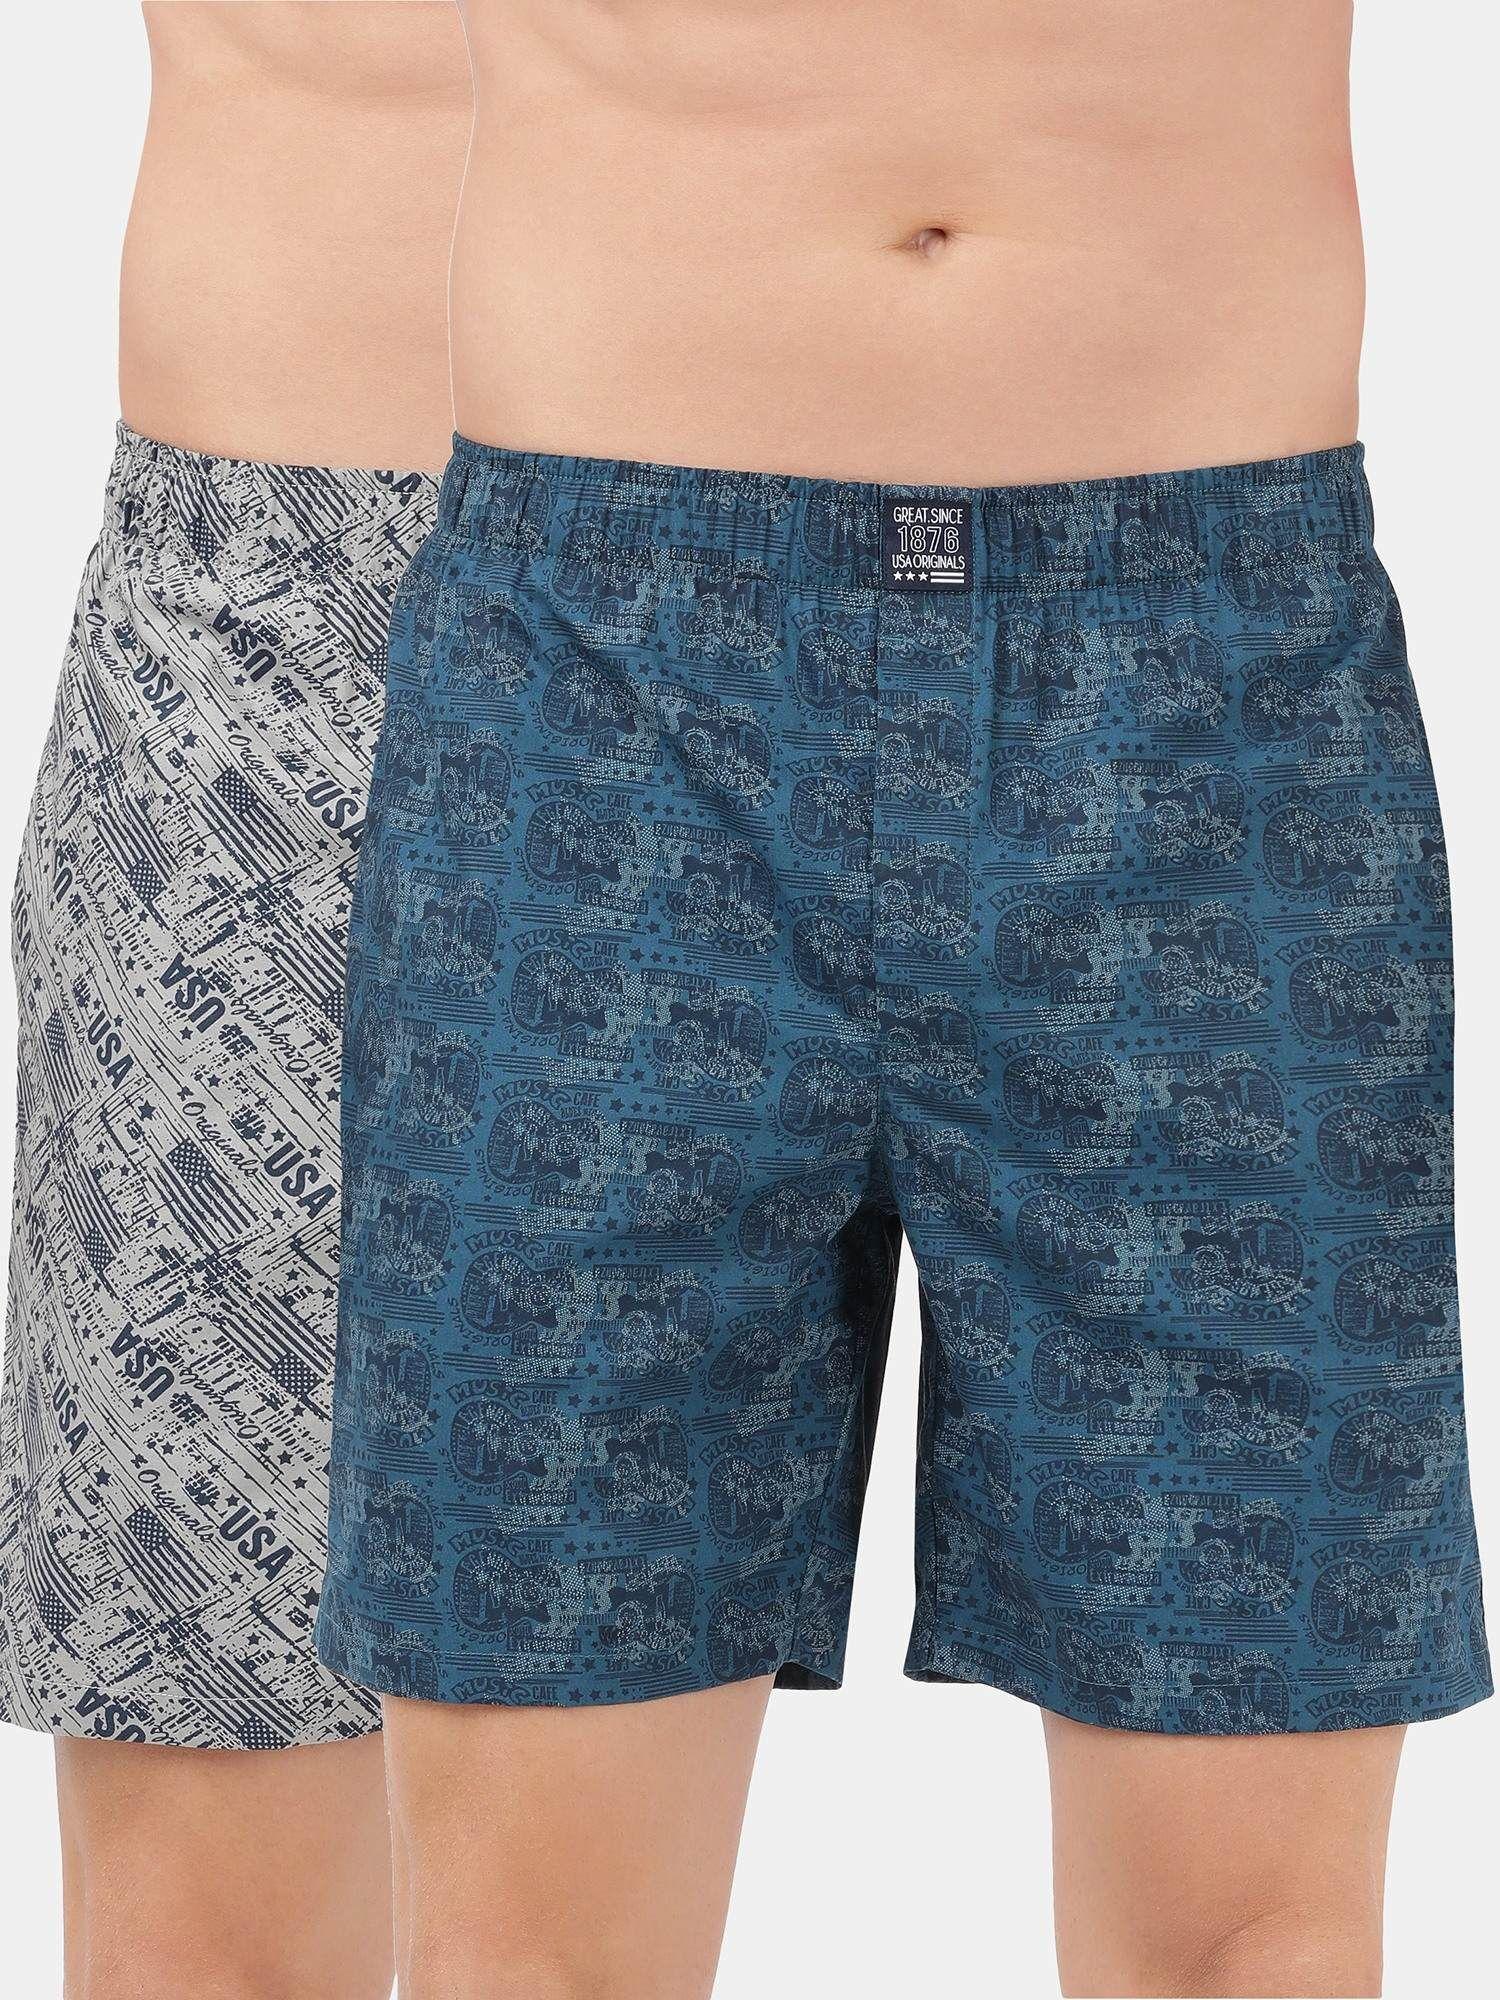 us57 mens cotton woven boxer shorts with side pocket - navy seaport teal (pack of 2)